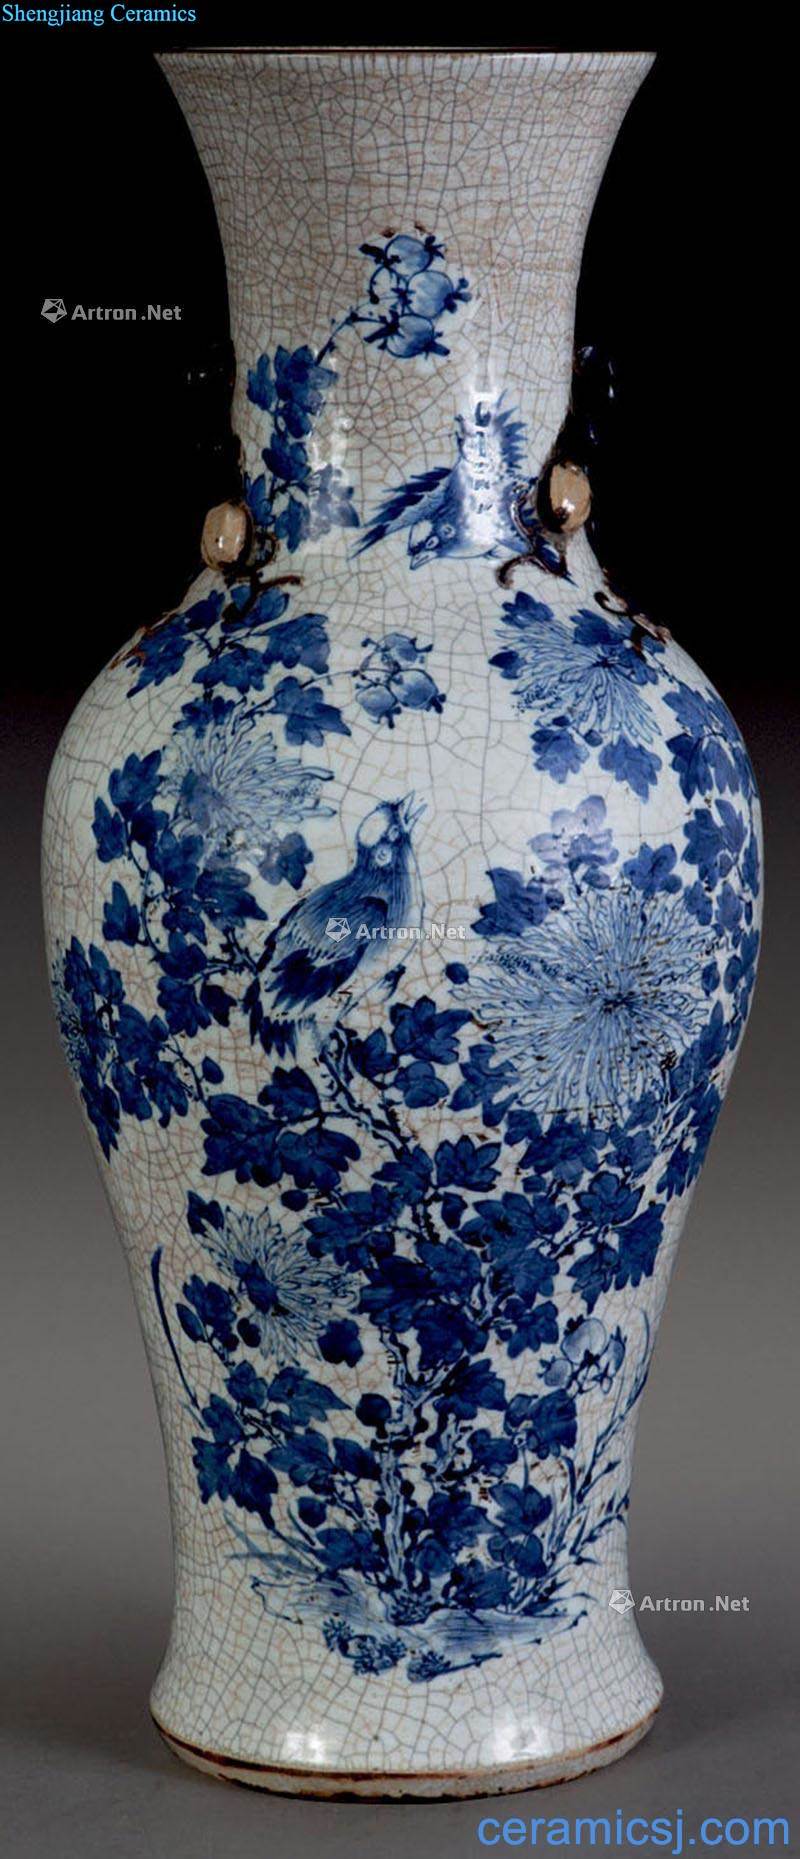 The elder brother of the qing dynasty porcelain porcelain painting of flowers and a bottle